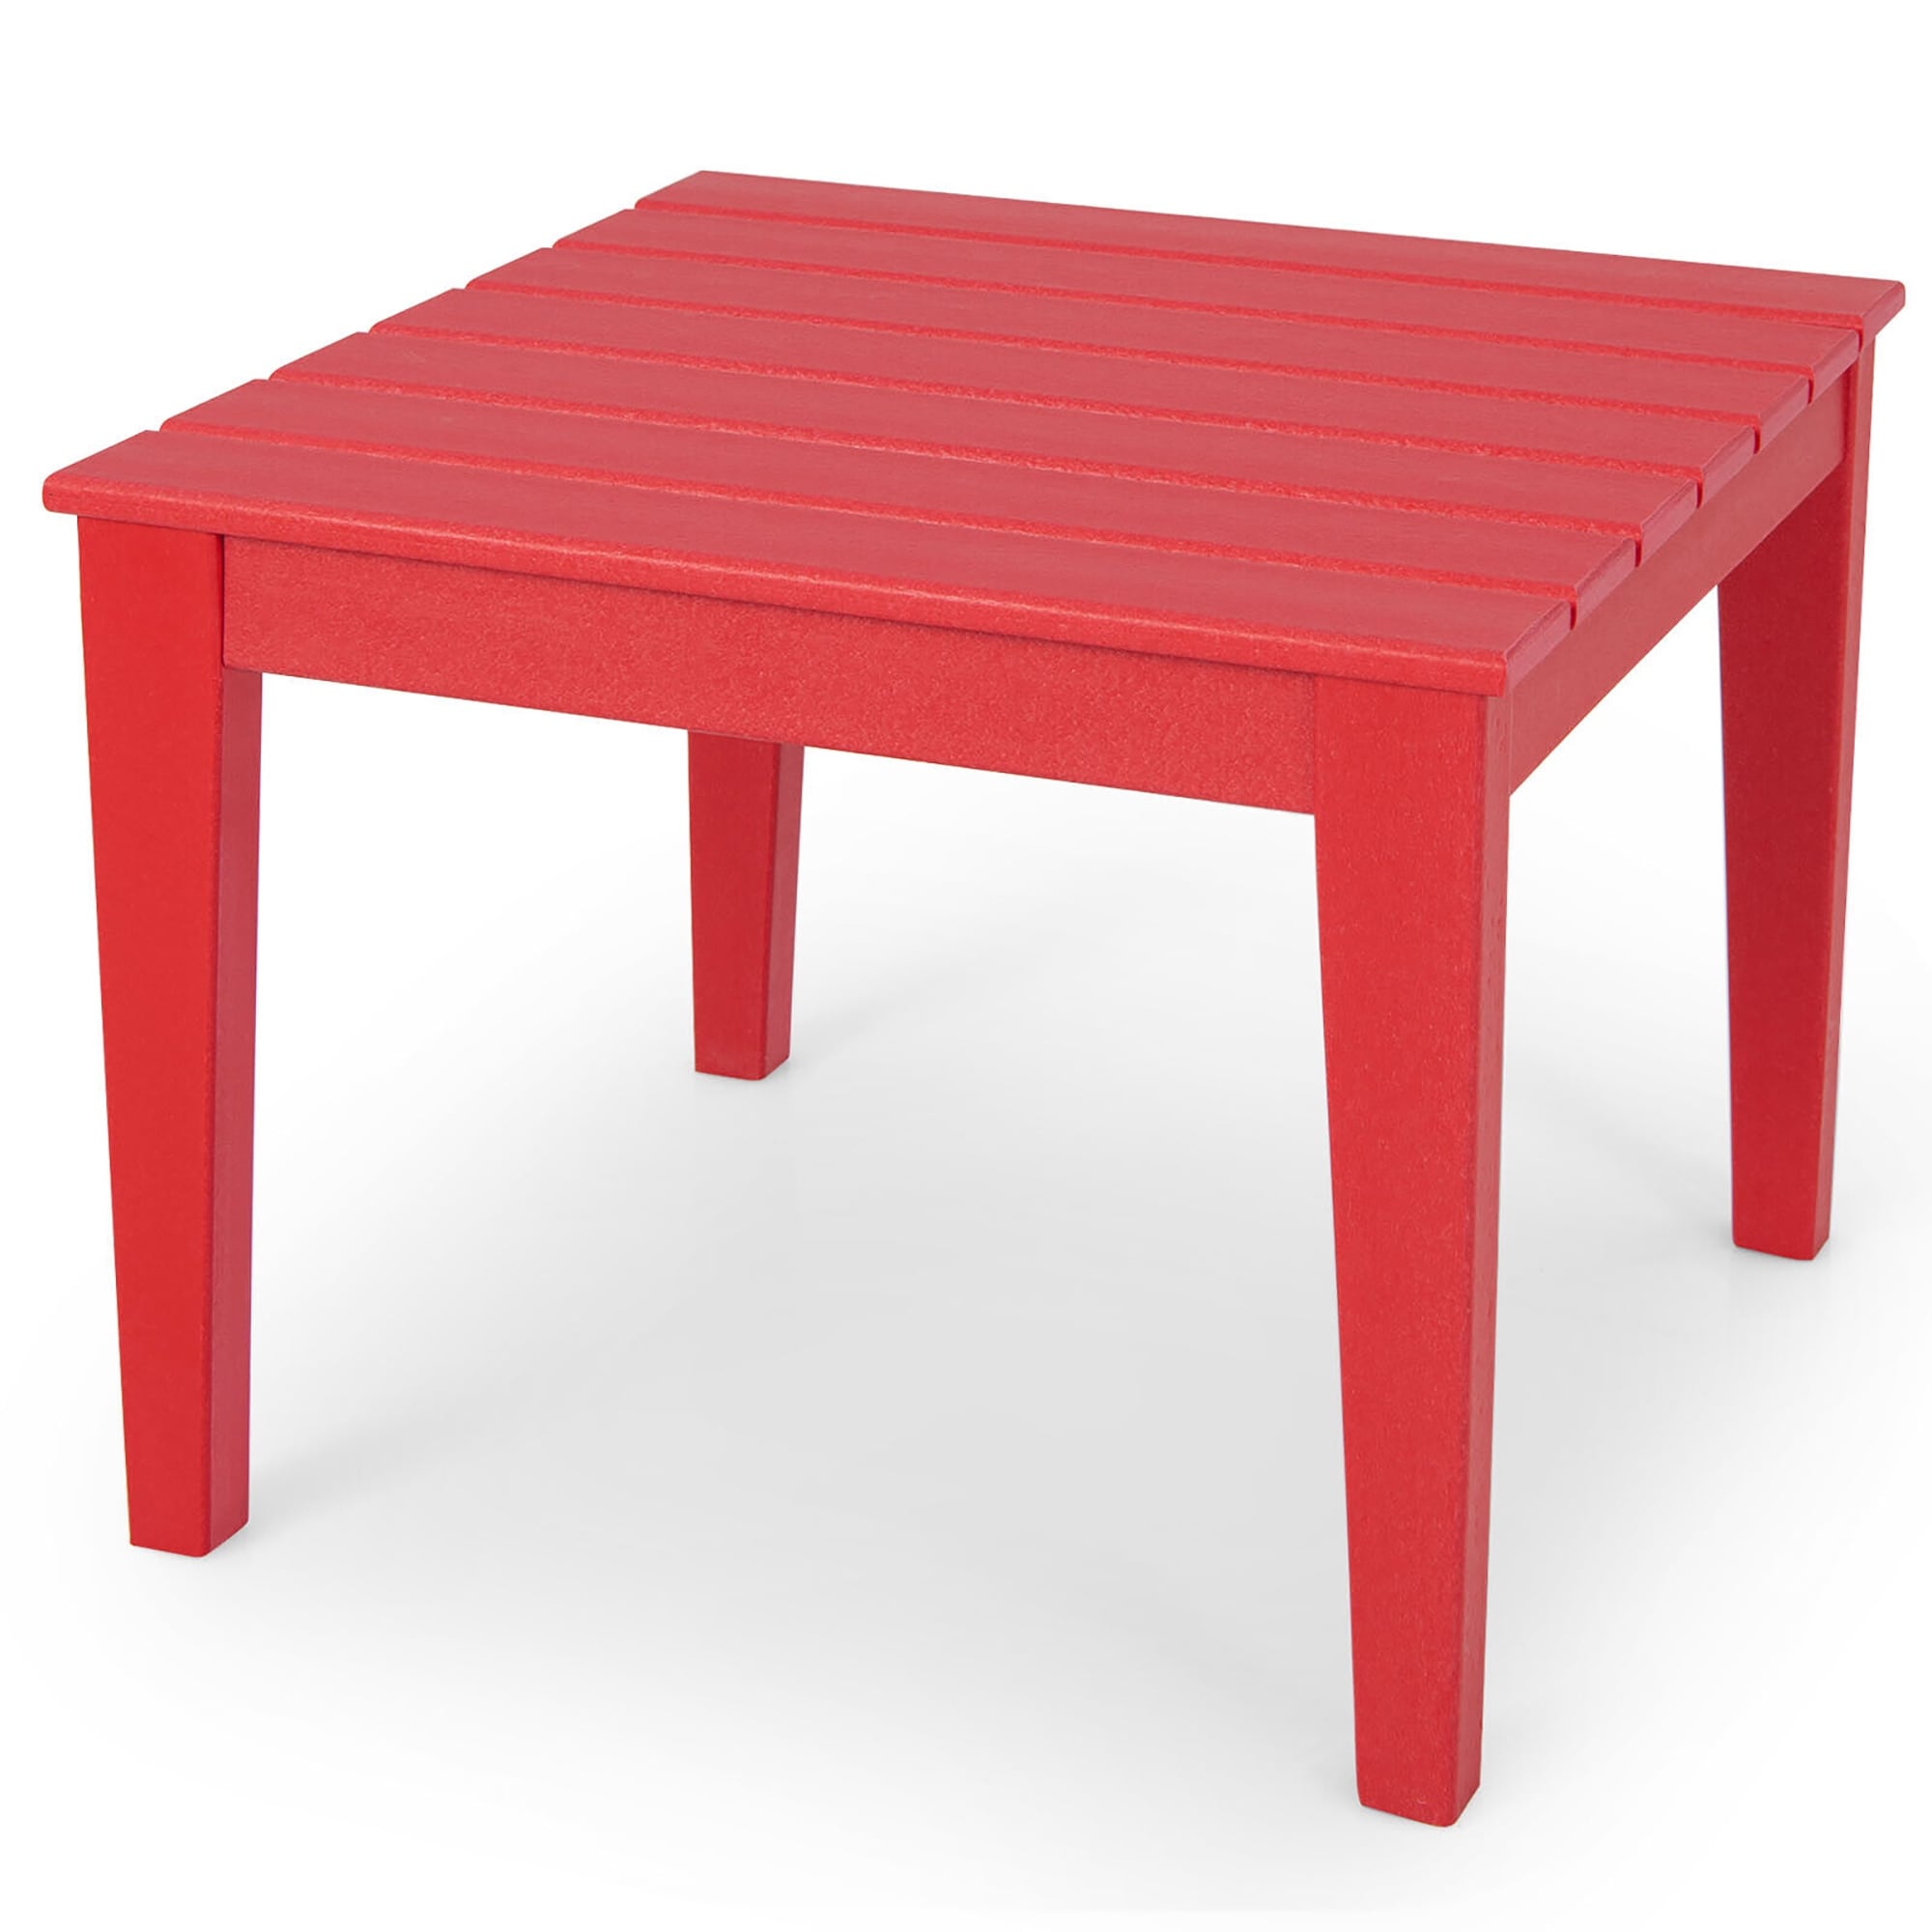 Gymax Kids Square Table Indoor Outdoor Heavy-Duty All-Weather Activity